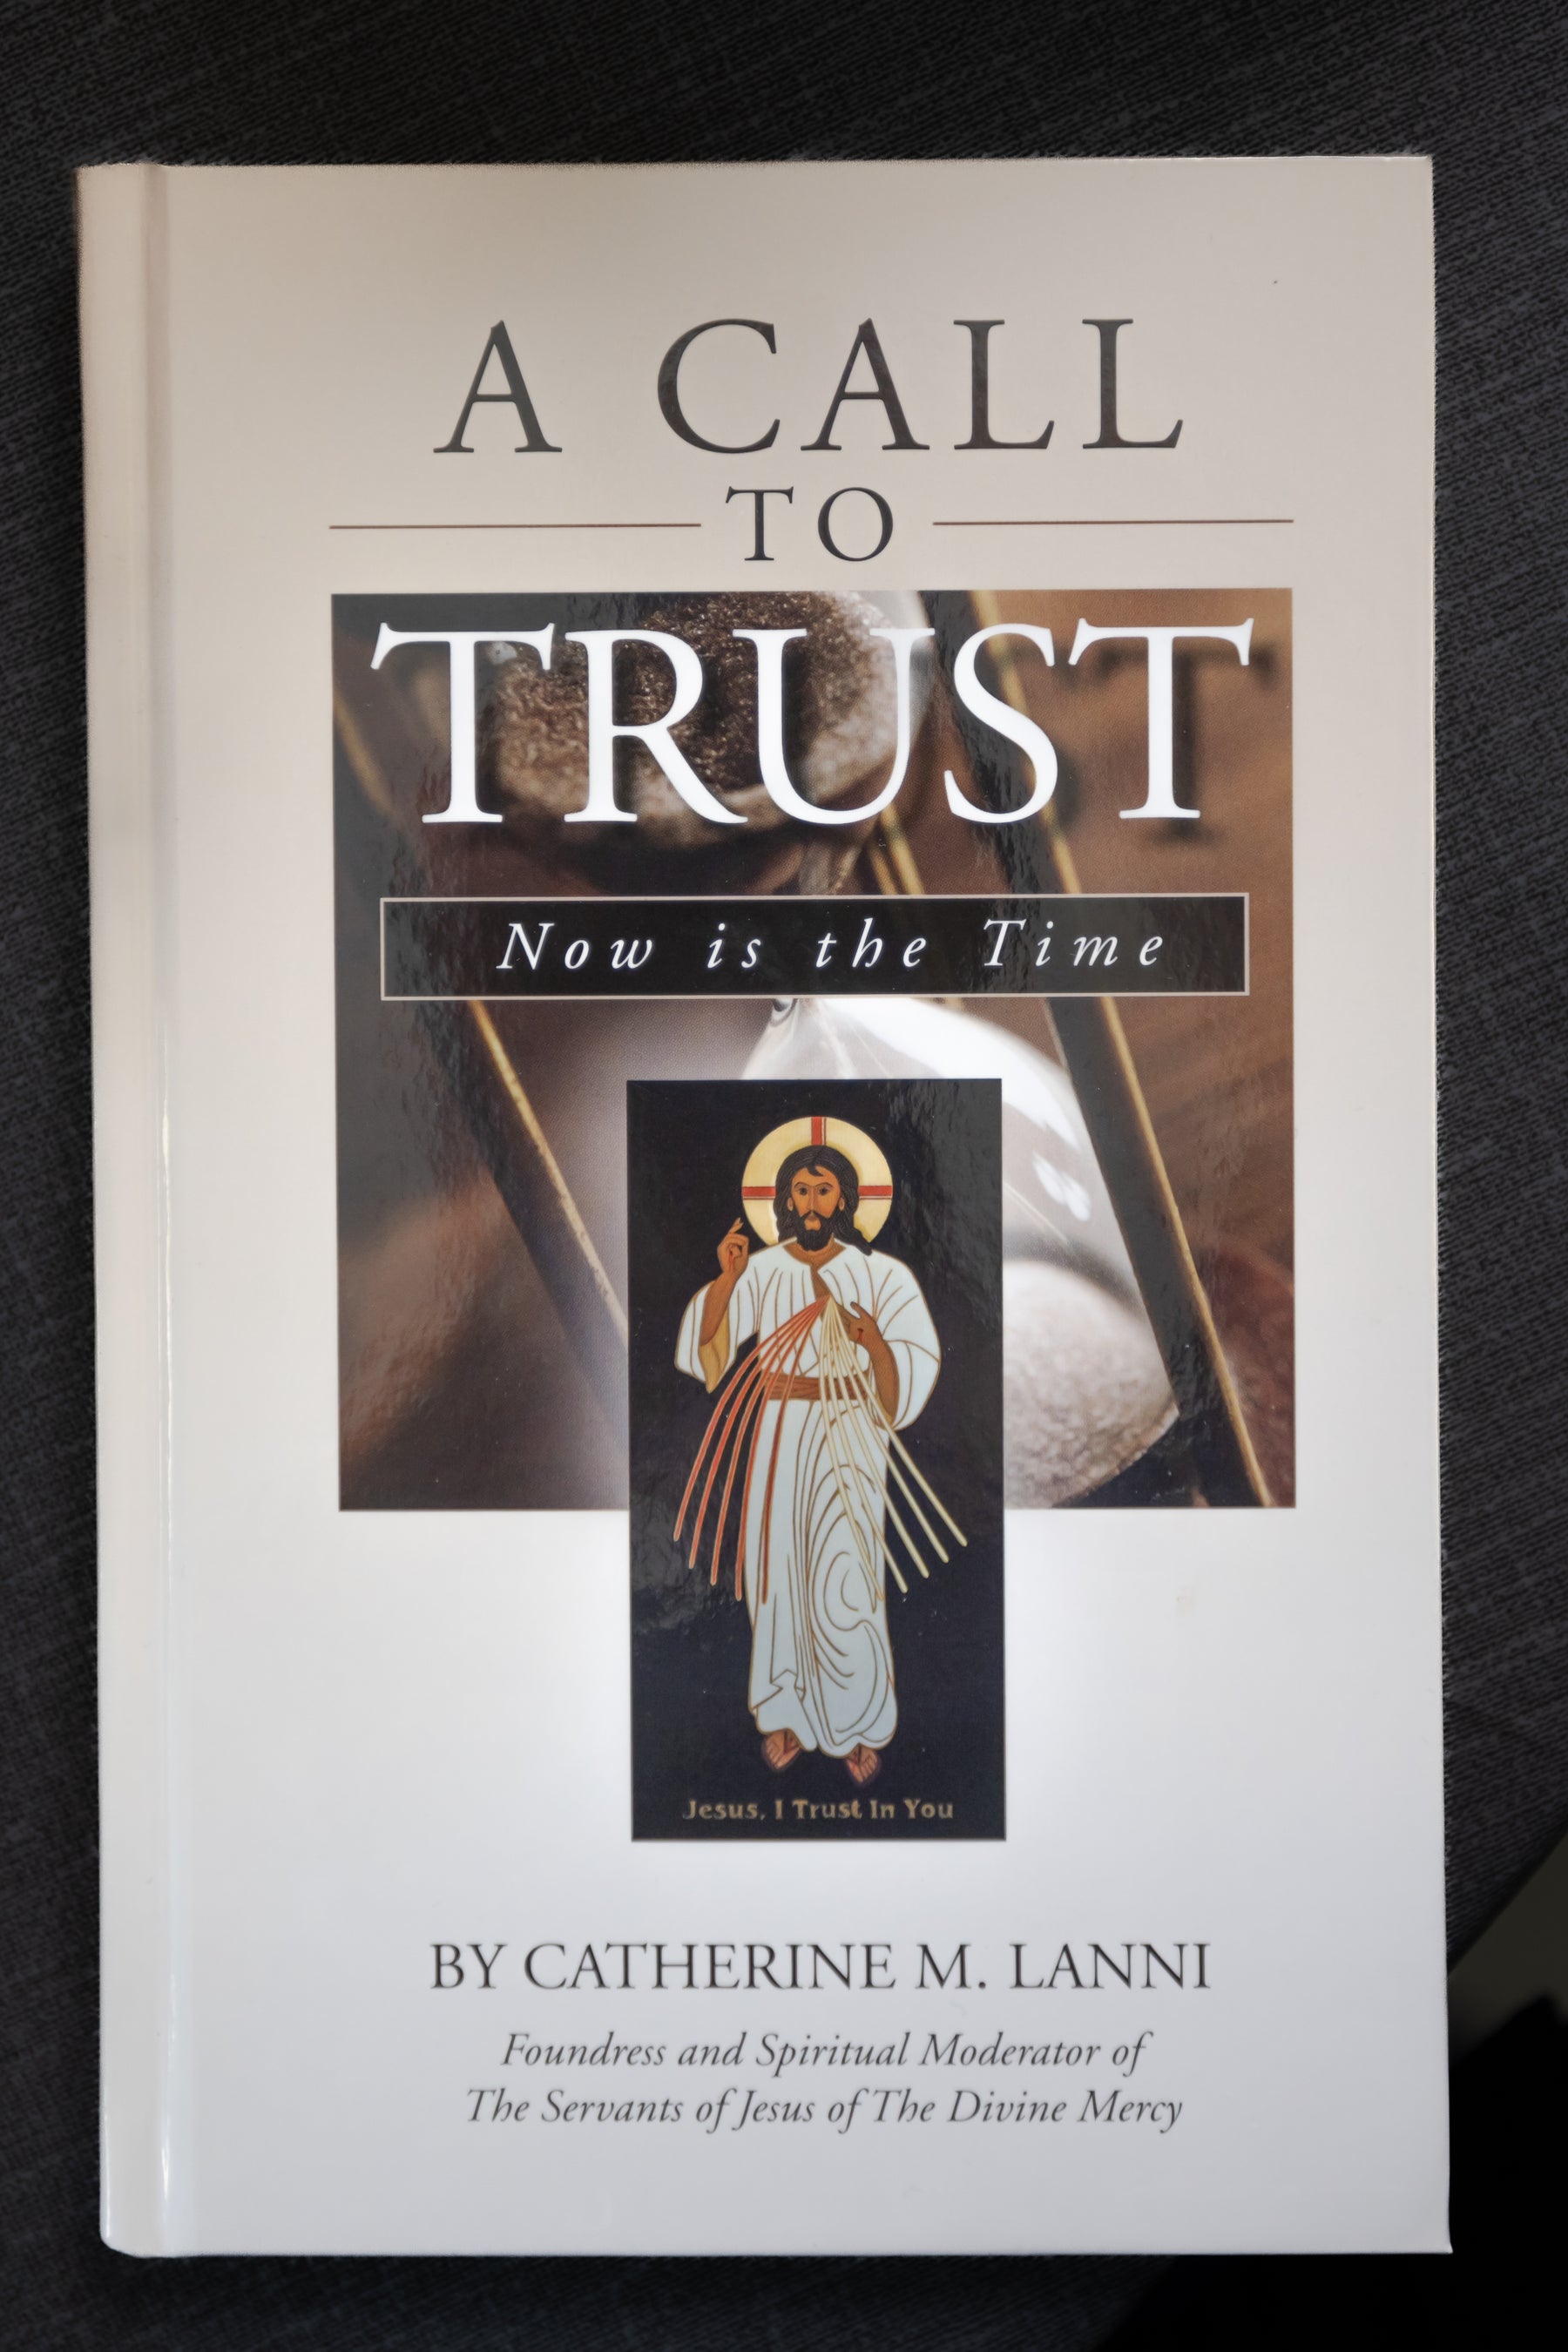 BK: A Call to Trust